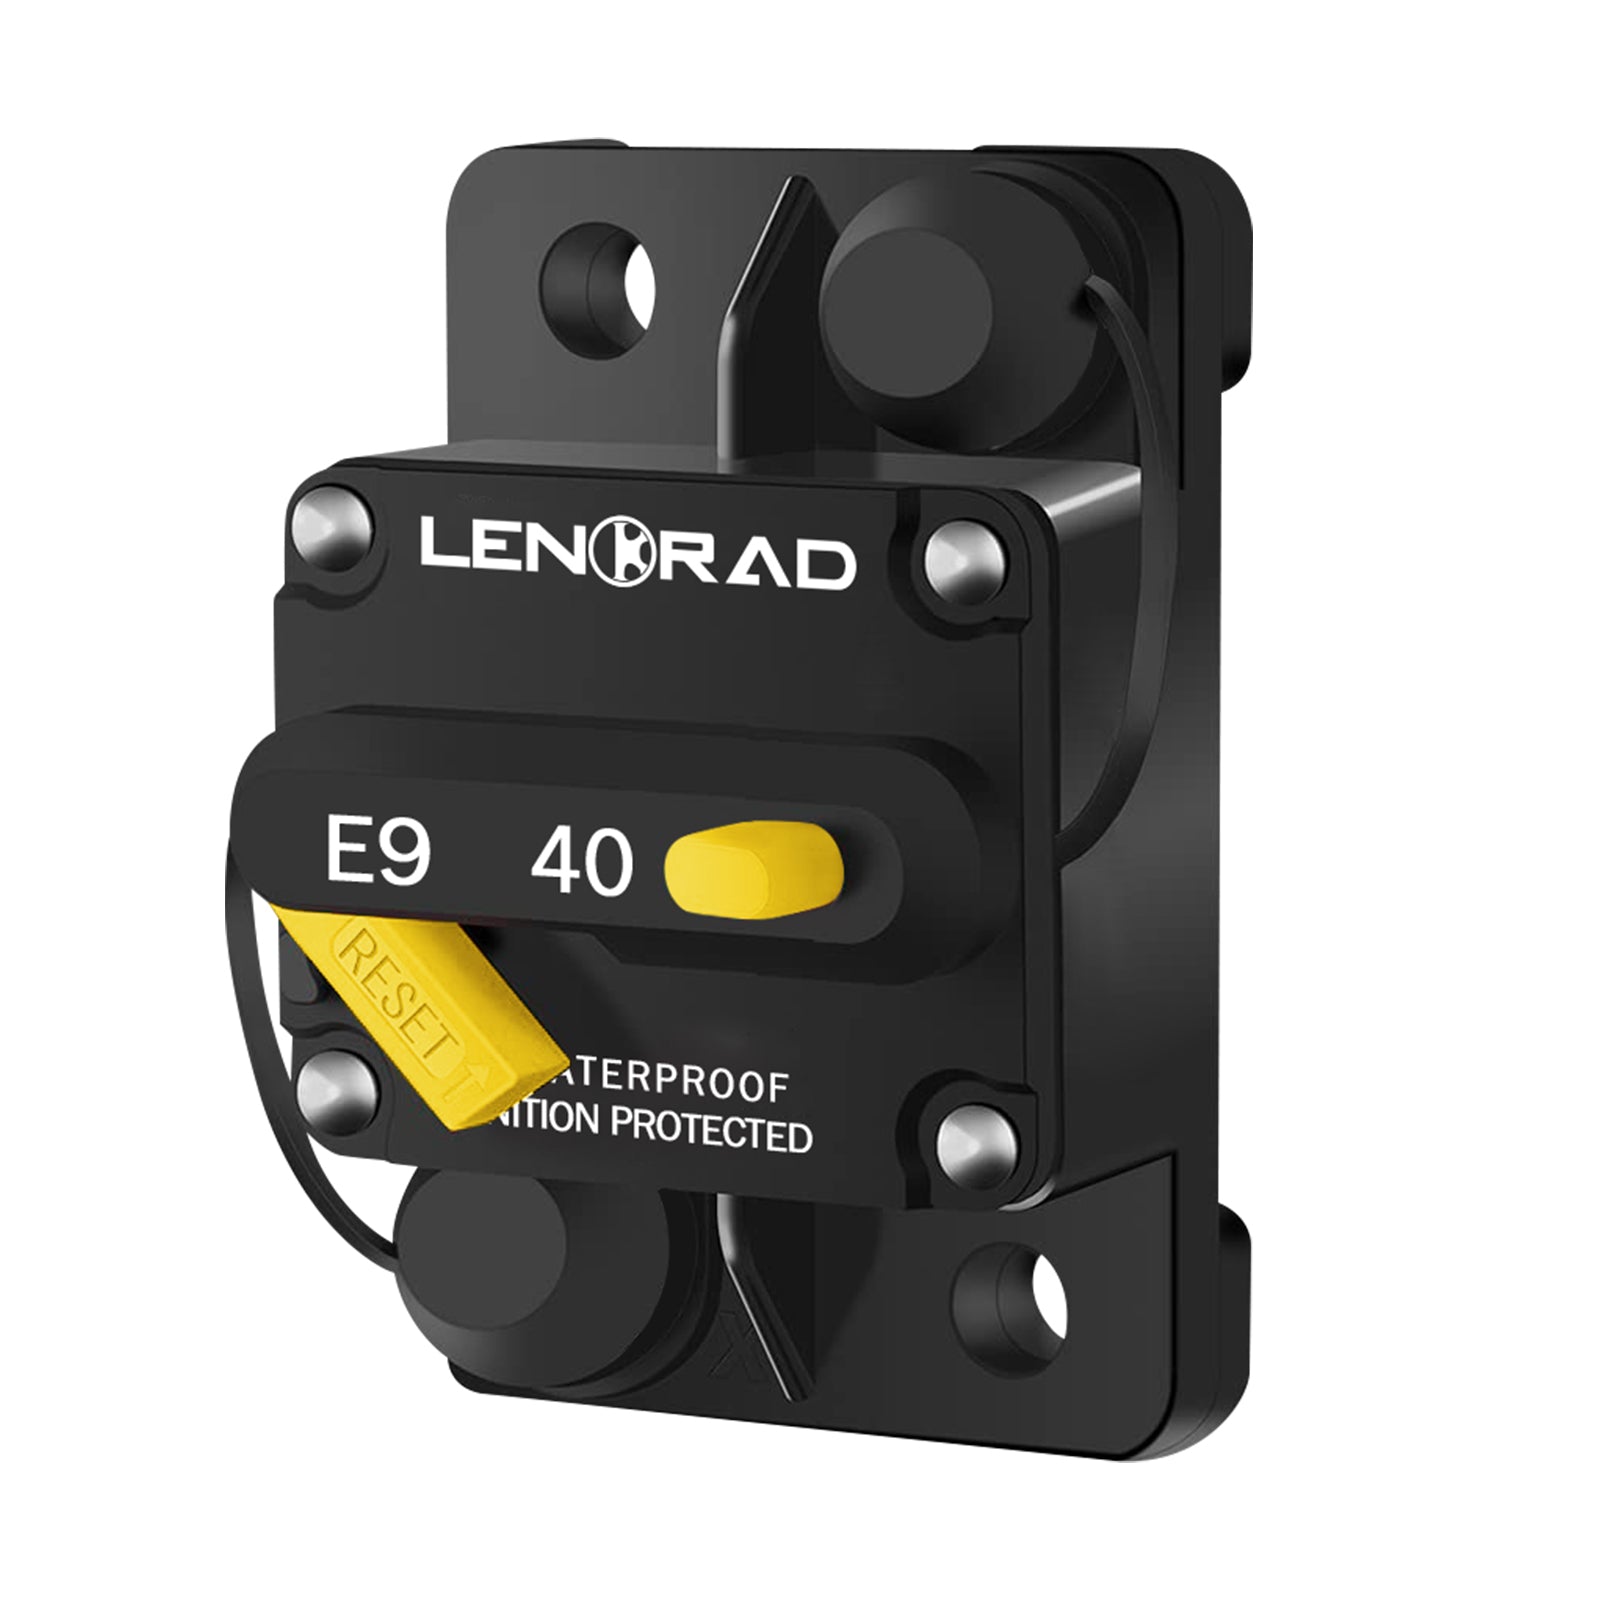 LENKRAD 40 Amp Circuit Breaker 12V with Manual Reset Switch Button for Boat Marine RV Yacht, Boat Circuit Breakers 12V - 48V DC, Waterproof(Surface Mount) - THALASSA